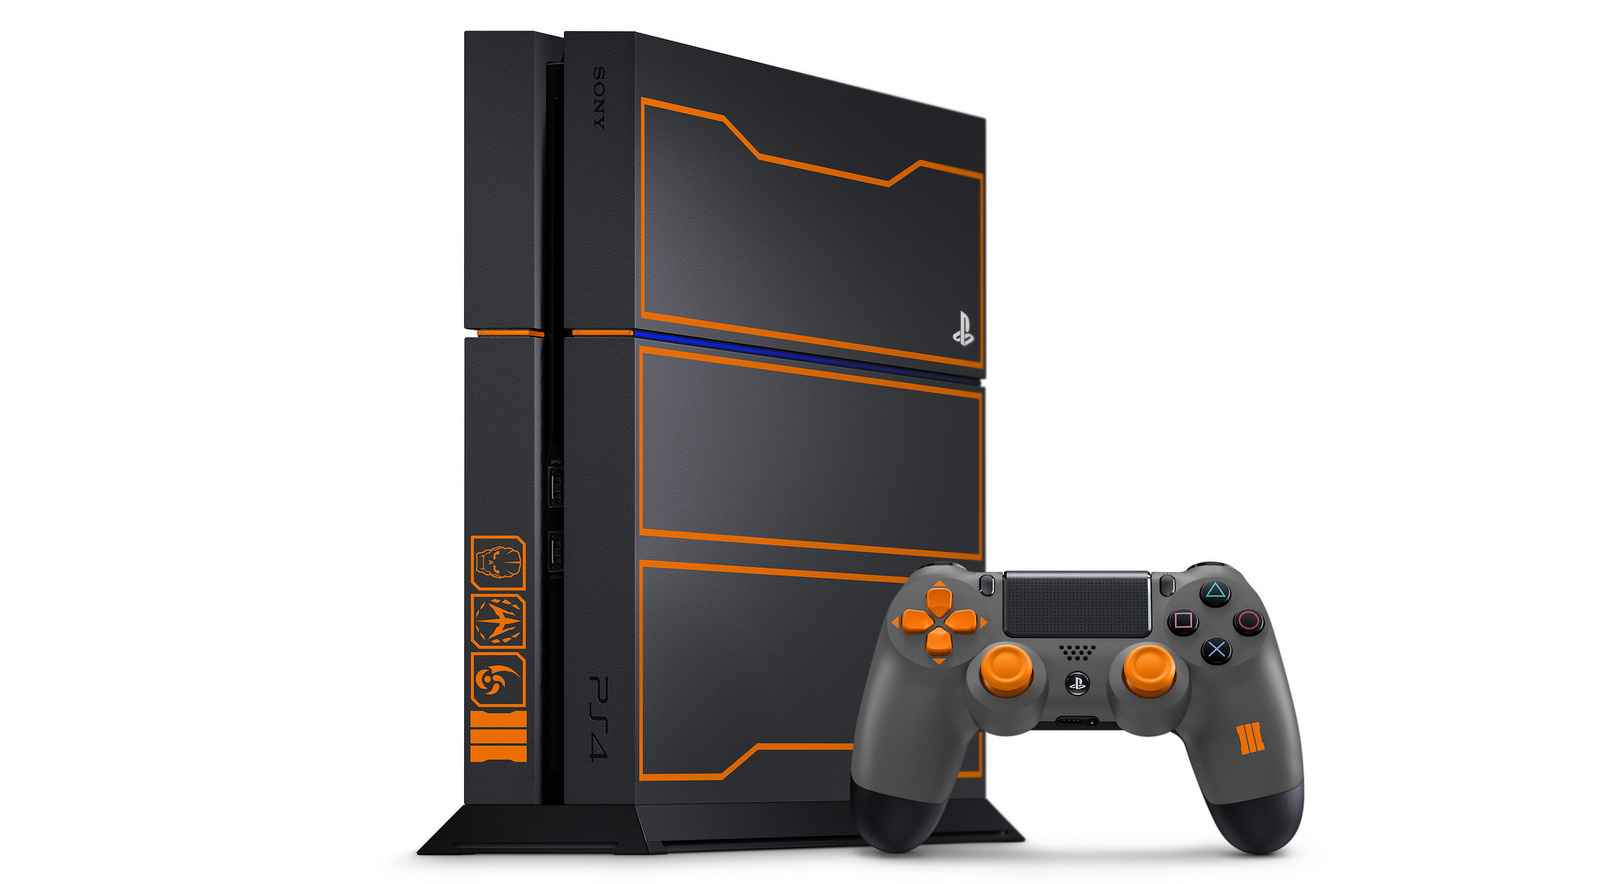 call of duty black ops playstation 4